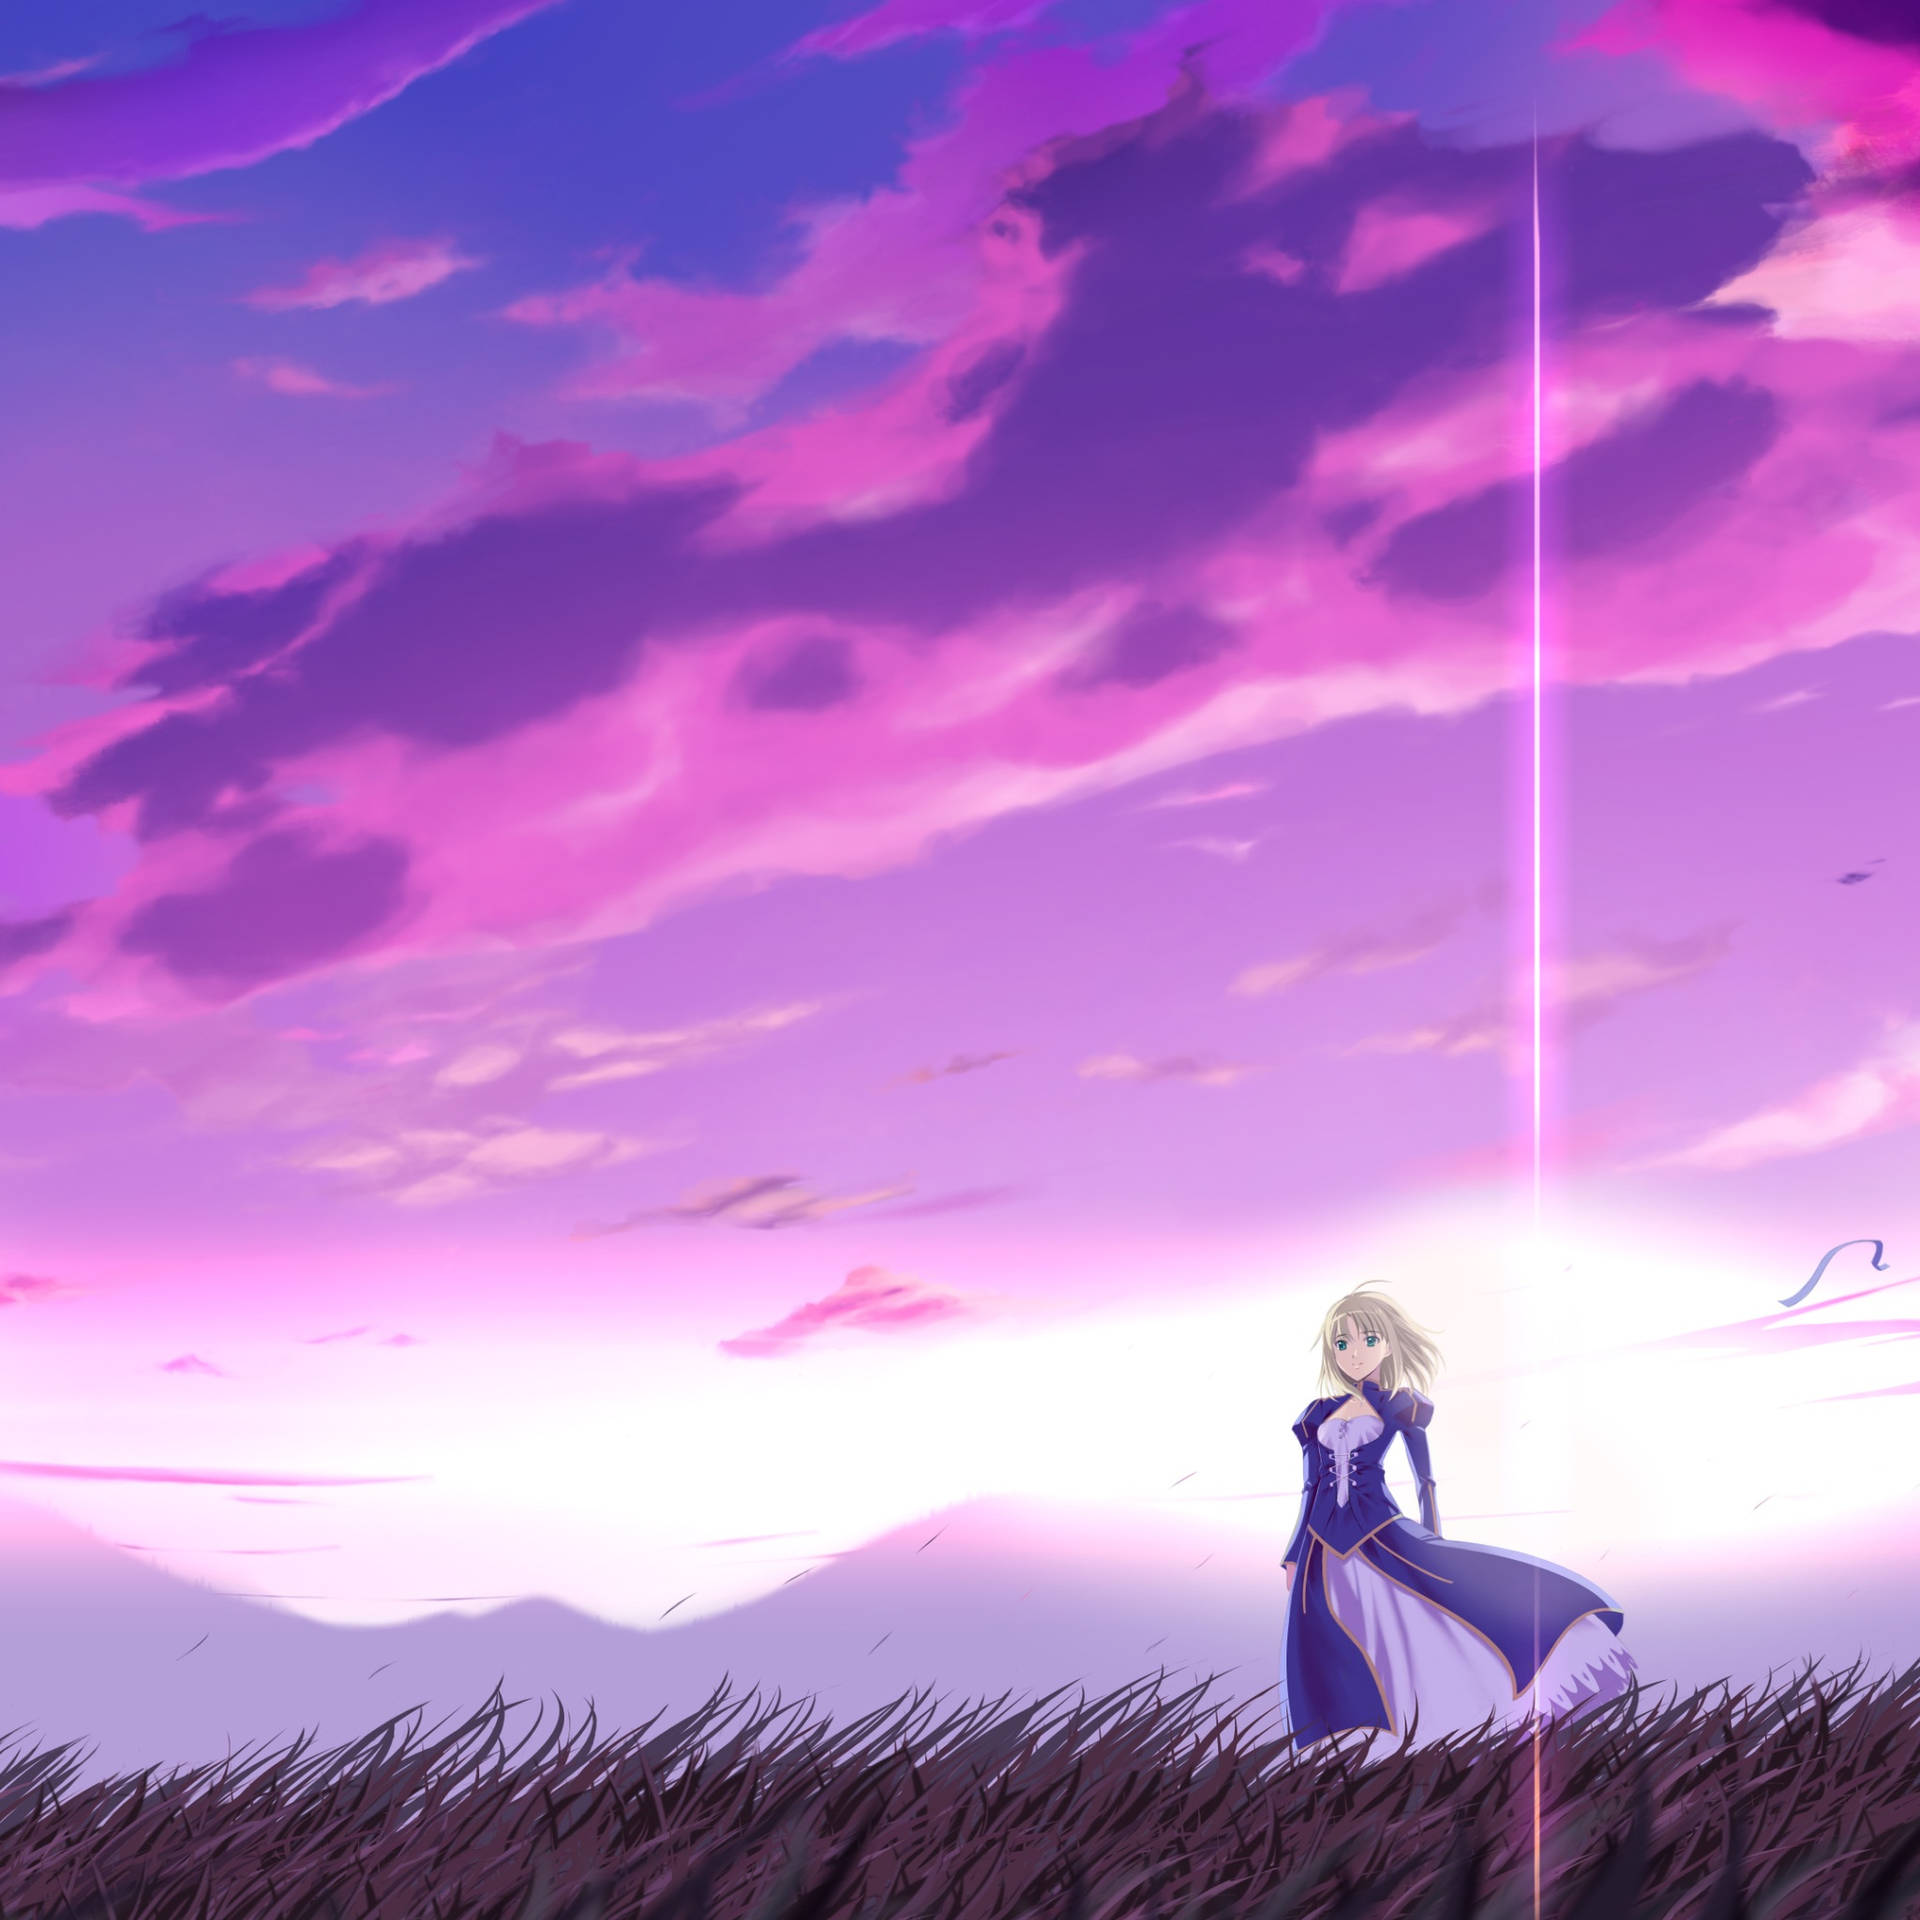 "Take a soothing journey through a beautiful anime-inspired landscape" Wallpaper